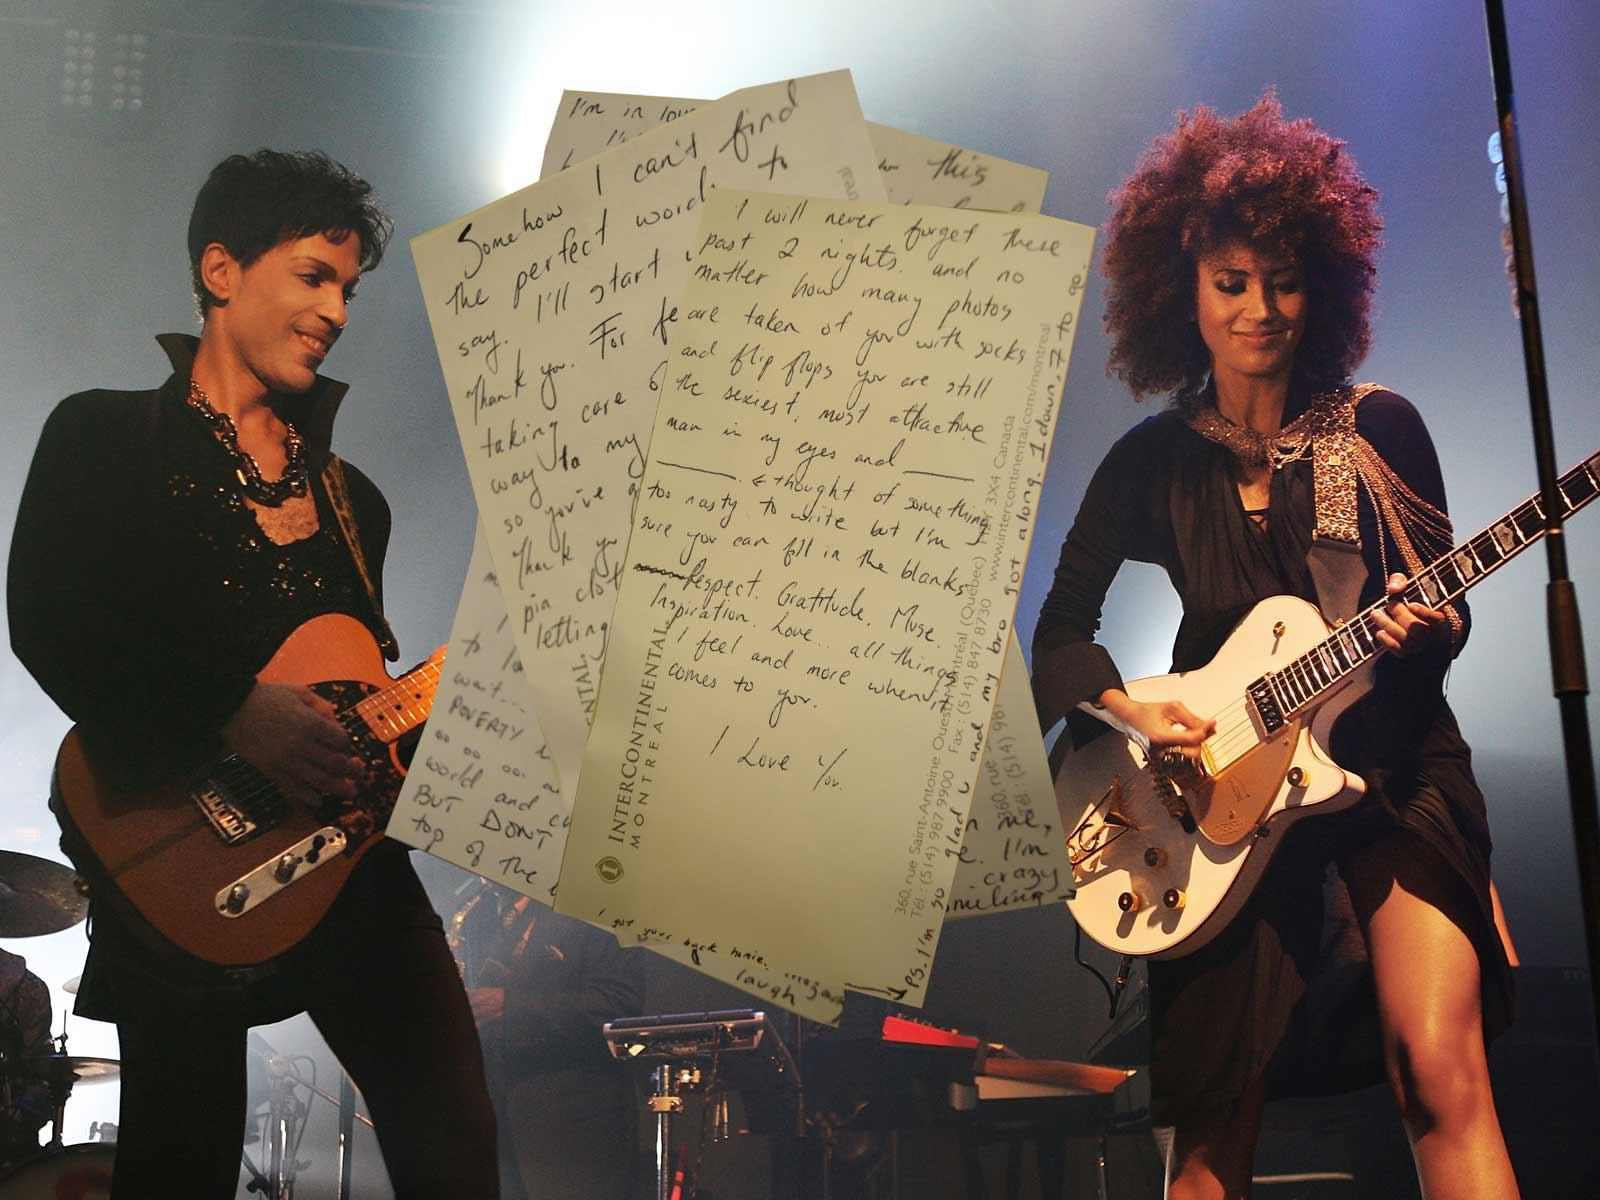 Prince Saved 2011 Love Letter From Singer Andy Allo: ‘I’m in Love With You’